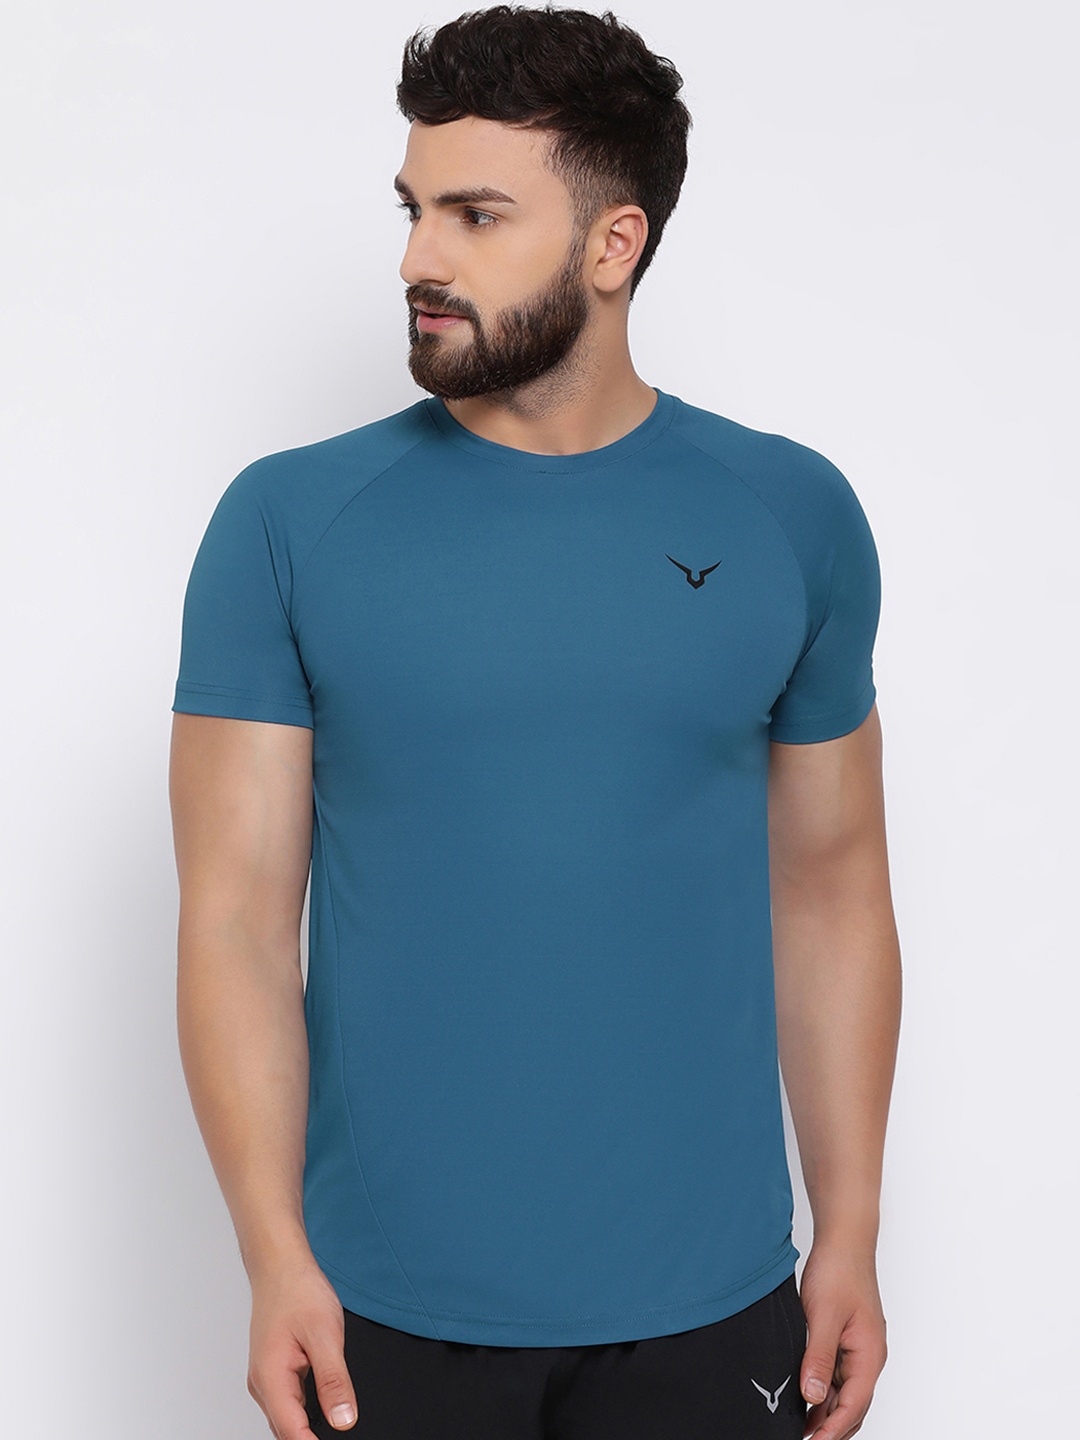 

Invincible Men Teal Solid Round Neck T-shirt